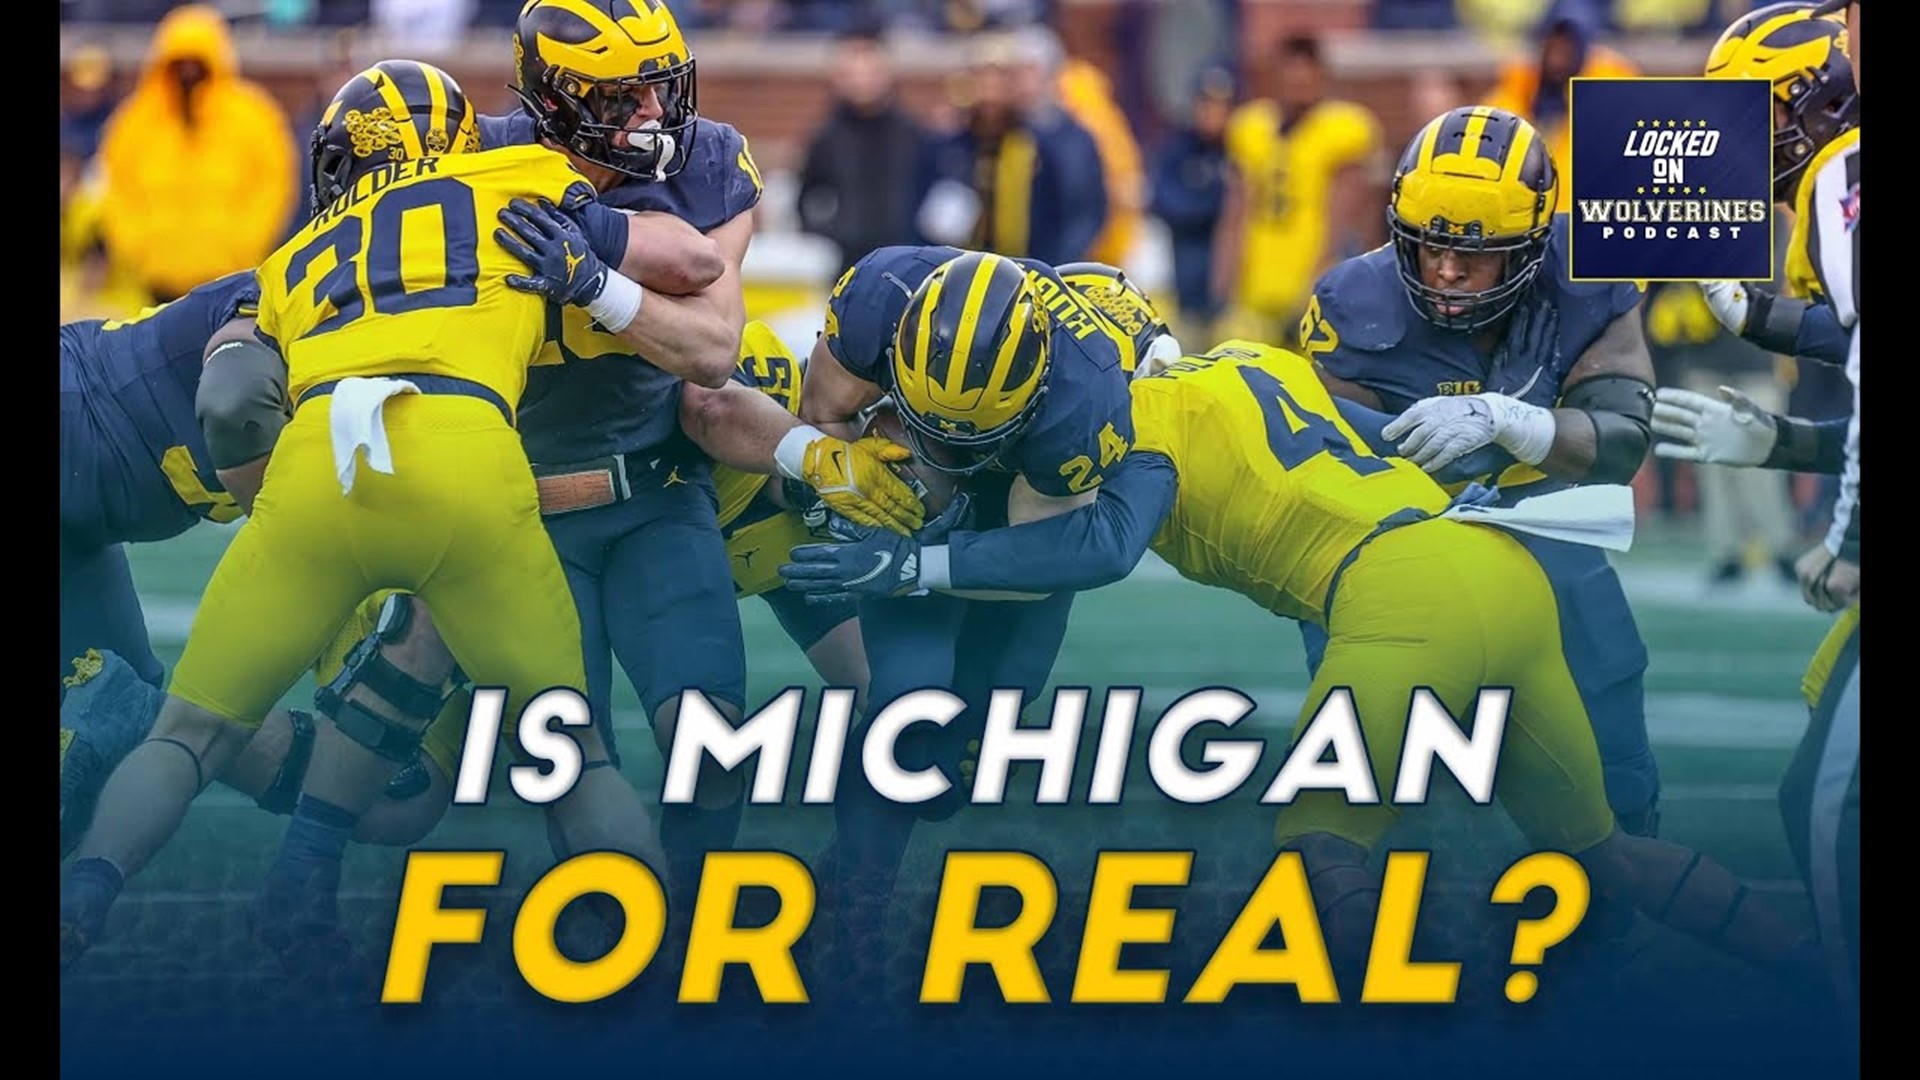 We can't be alone in remembering the last time we had big expectations for Michigan football along with the rest of the football world only to see the them falter